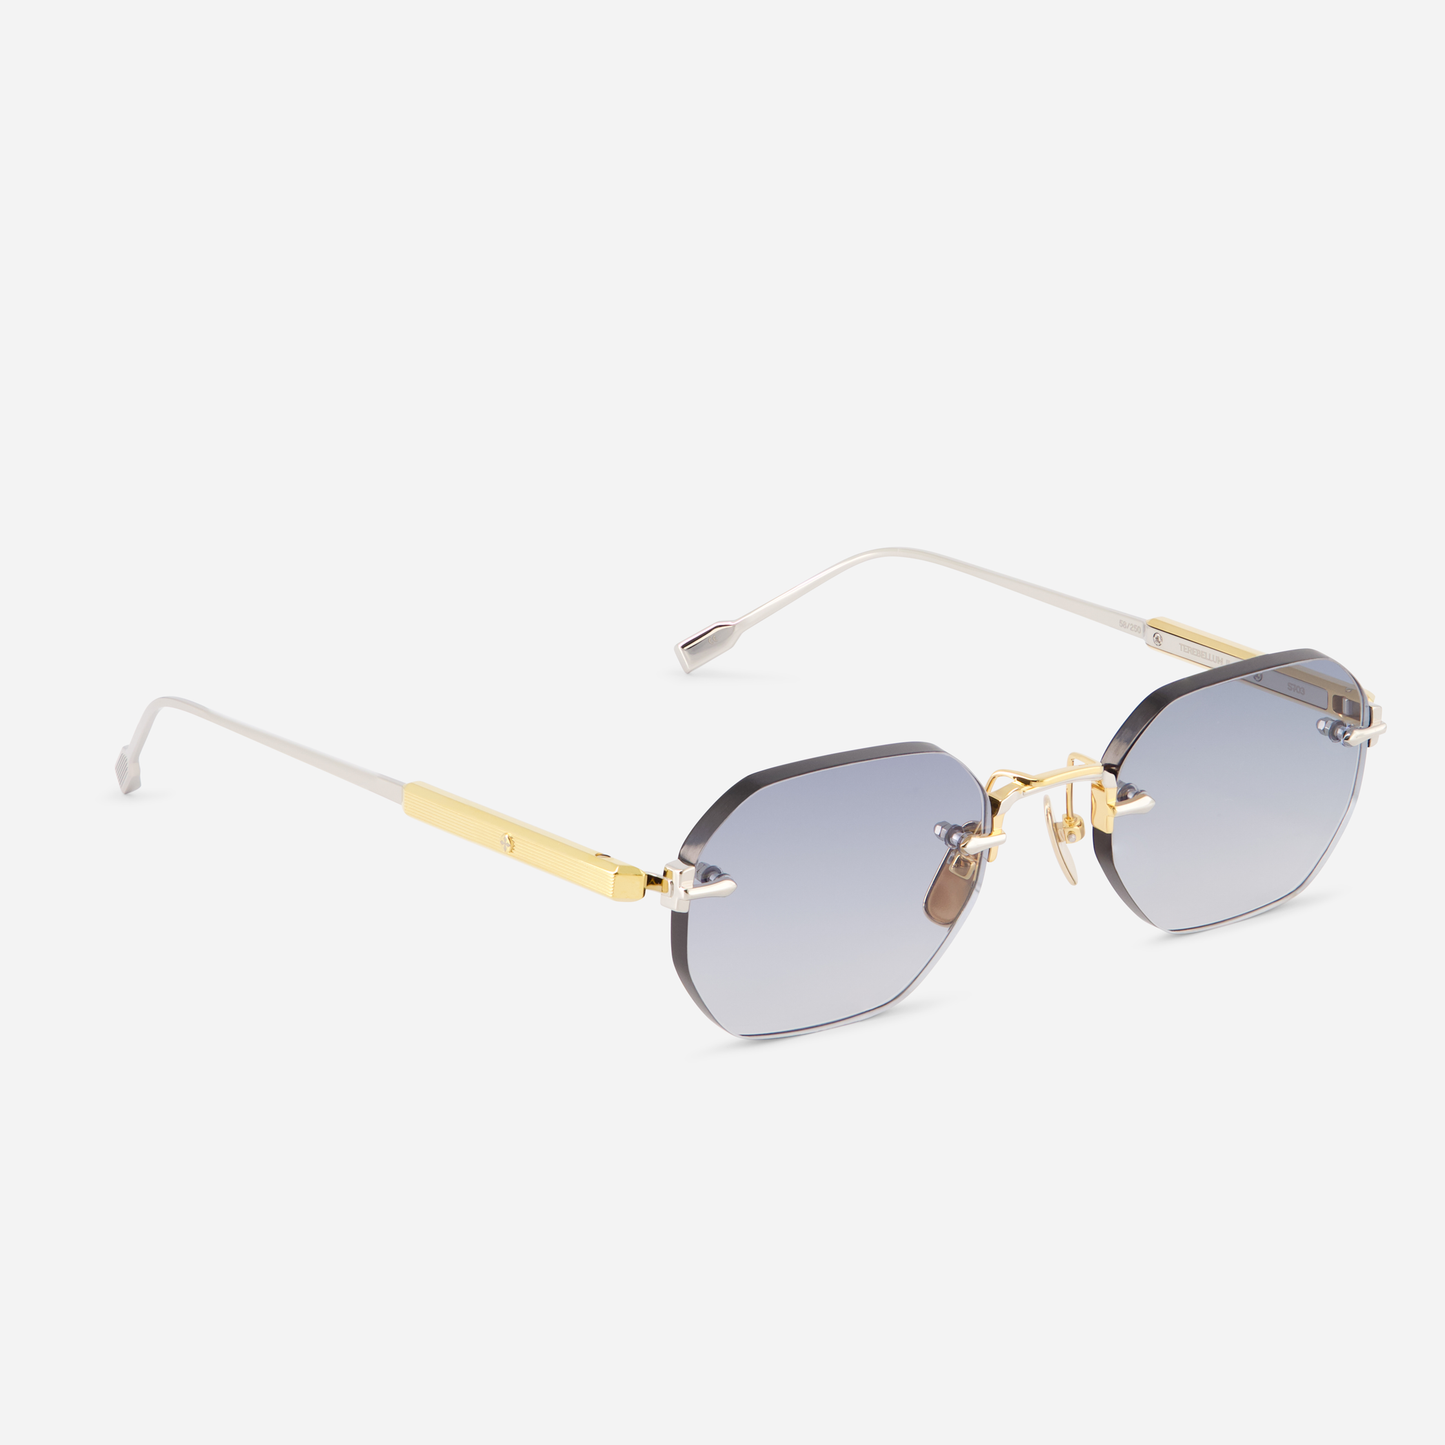 Terebellum II S703, with its uniquely rounded hexagonal rimless silhouette, adorned in yellow gold and platinum, beautifully contrasted by blue lenses.